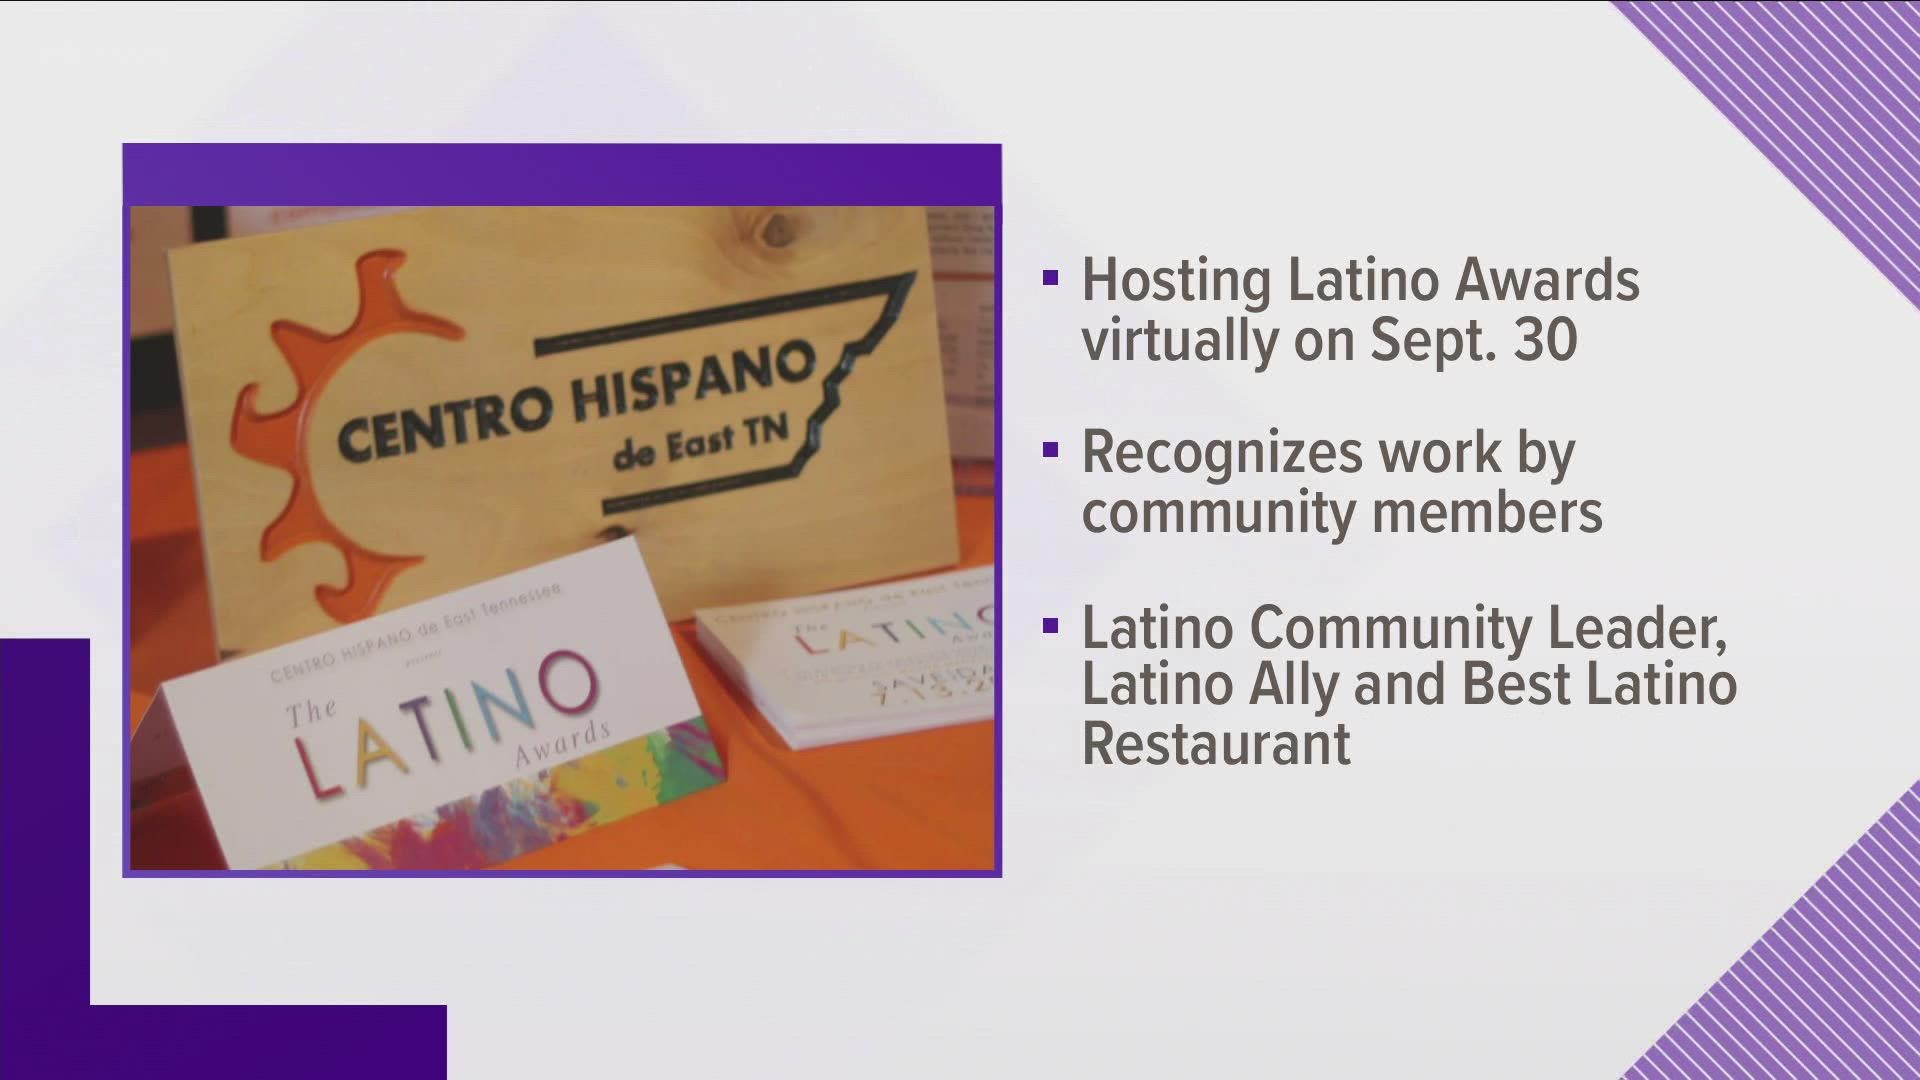 Check out all the events to enjoy during Hispanic Heritage Month.